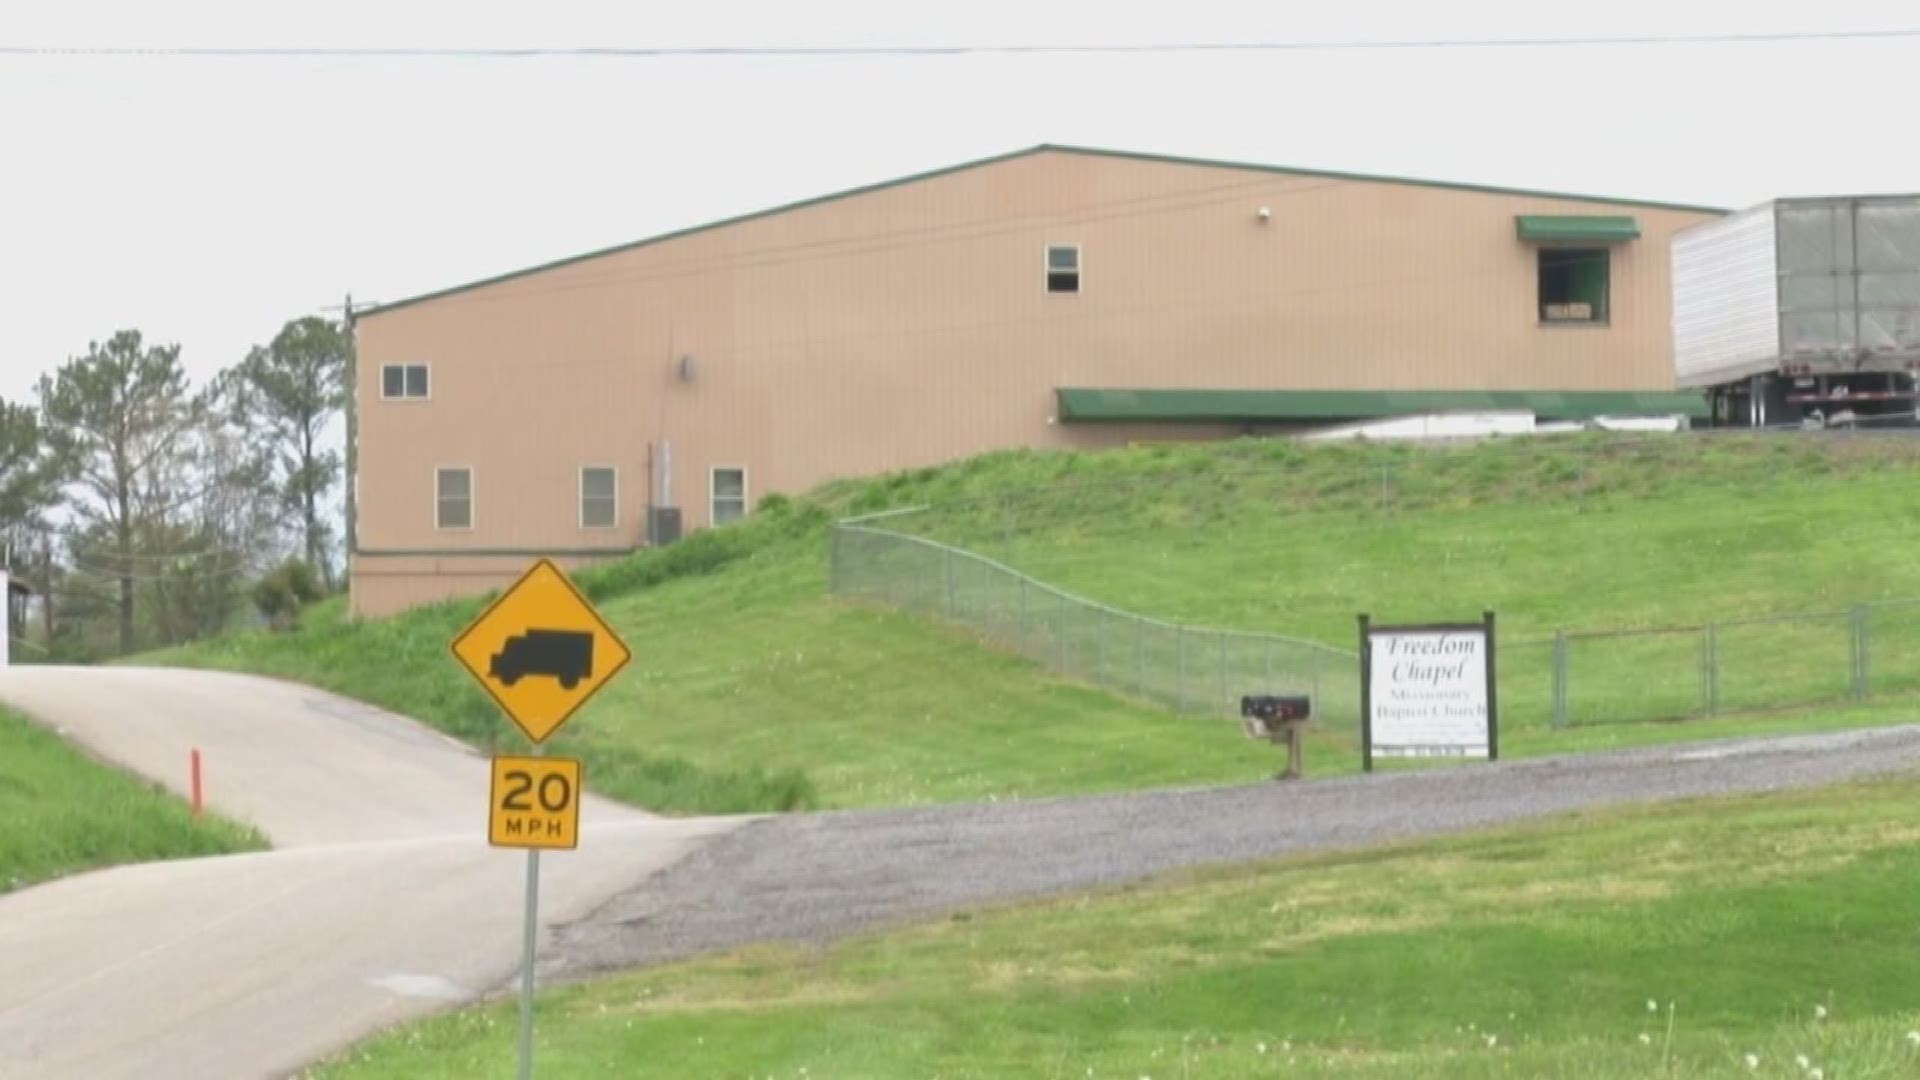 April 16, 2018: A meat packing plant raided by federal agents is back in operation, but the Grainger County Mayor has serious concerns about its future and the impact on the local economy.